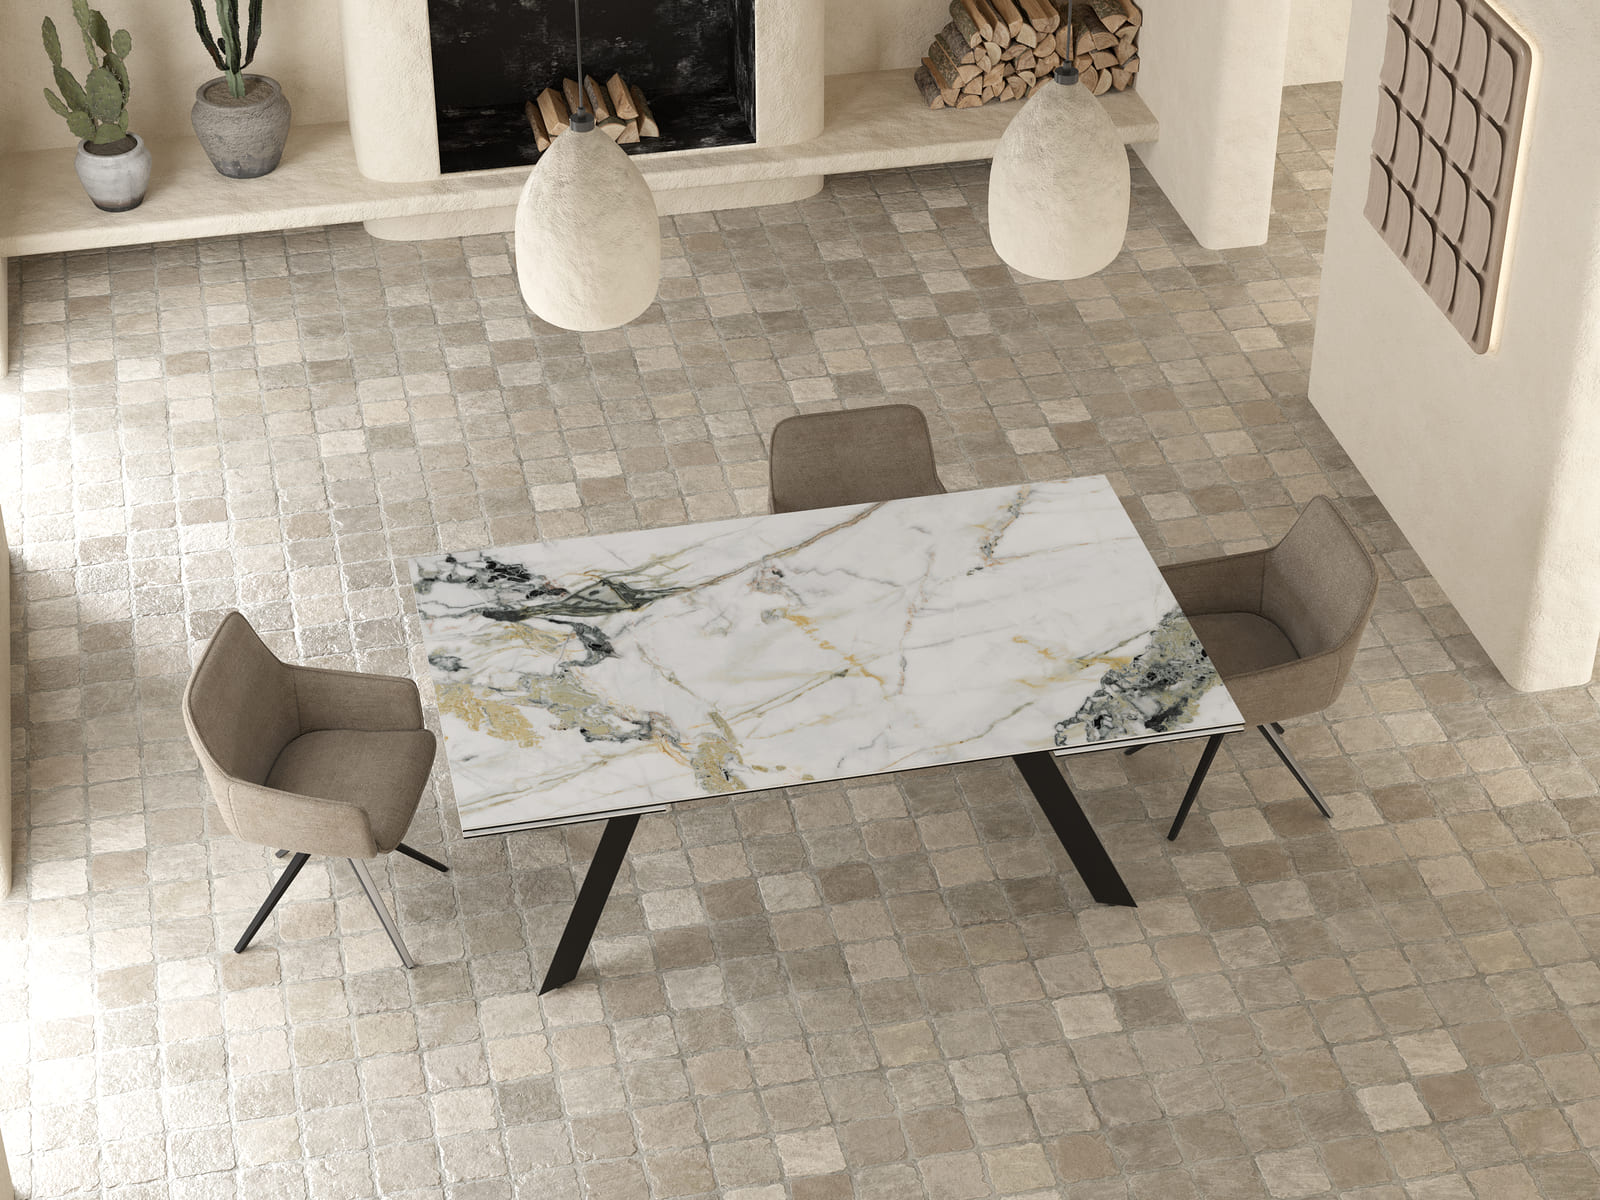 Astra Grande Extending Dining Table